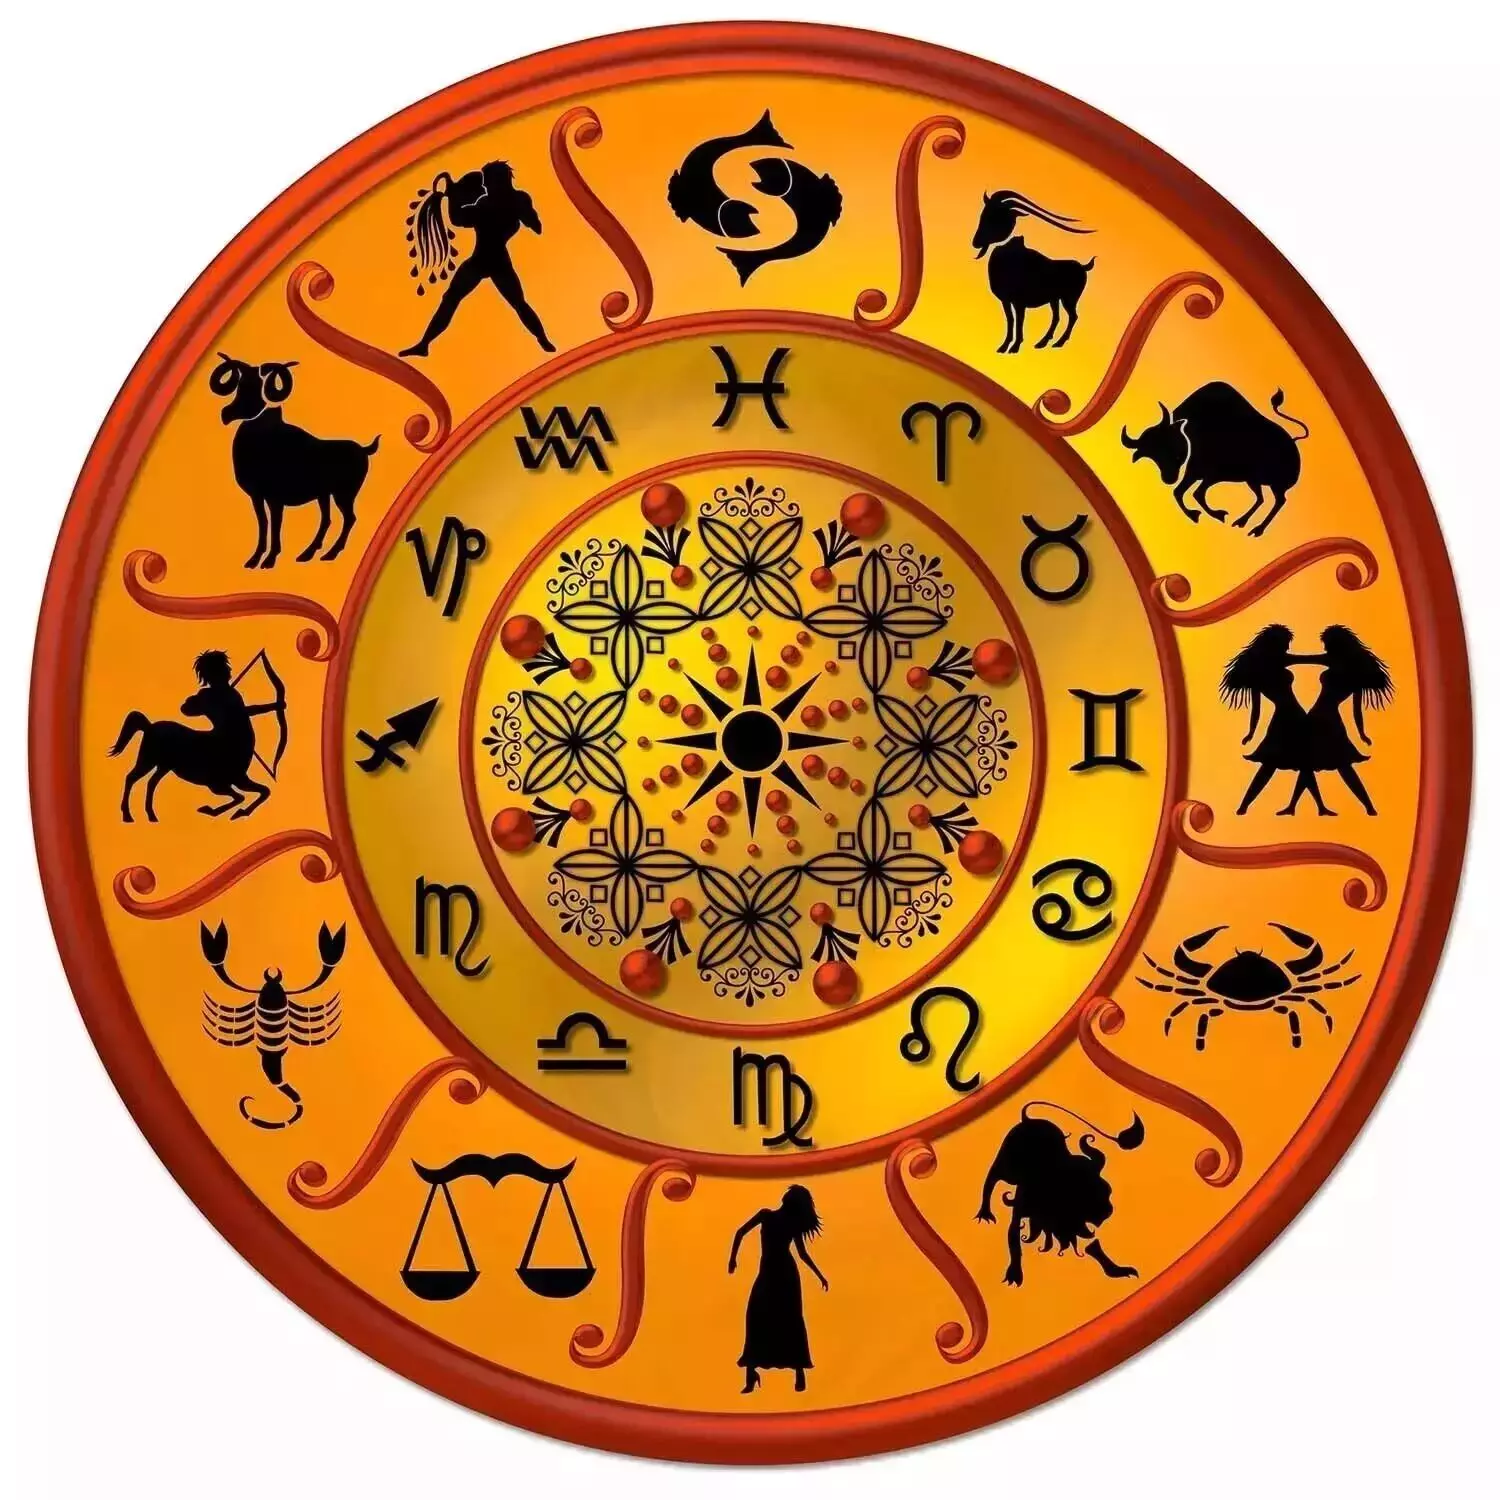 10 February – Know your todays horoscope